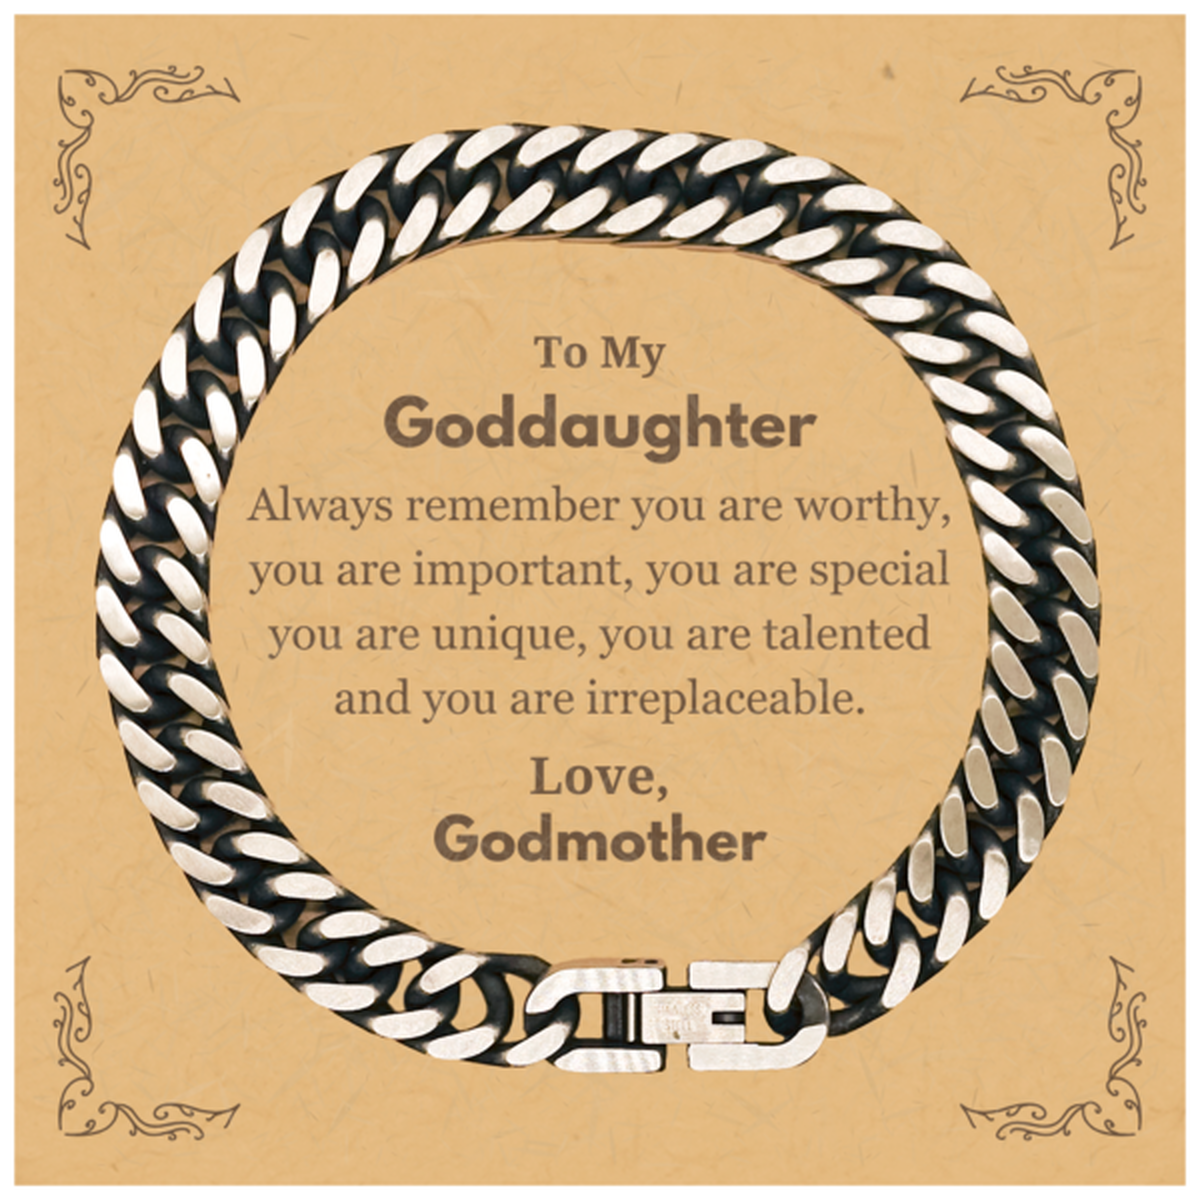 Goddaughter Birthday Gifts from Godmother, Inspirational Cuban Link Chain Bracelet for Goddaughter Christmas Graduation Gifts for Goddaughter Always remember you are worthy, you are important. Love, Godmother